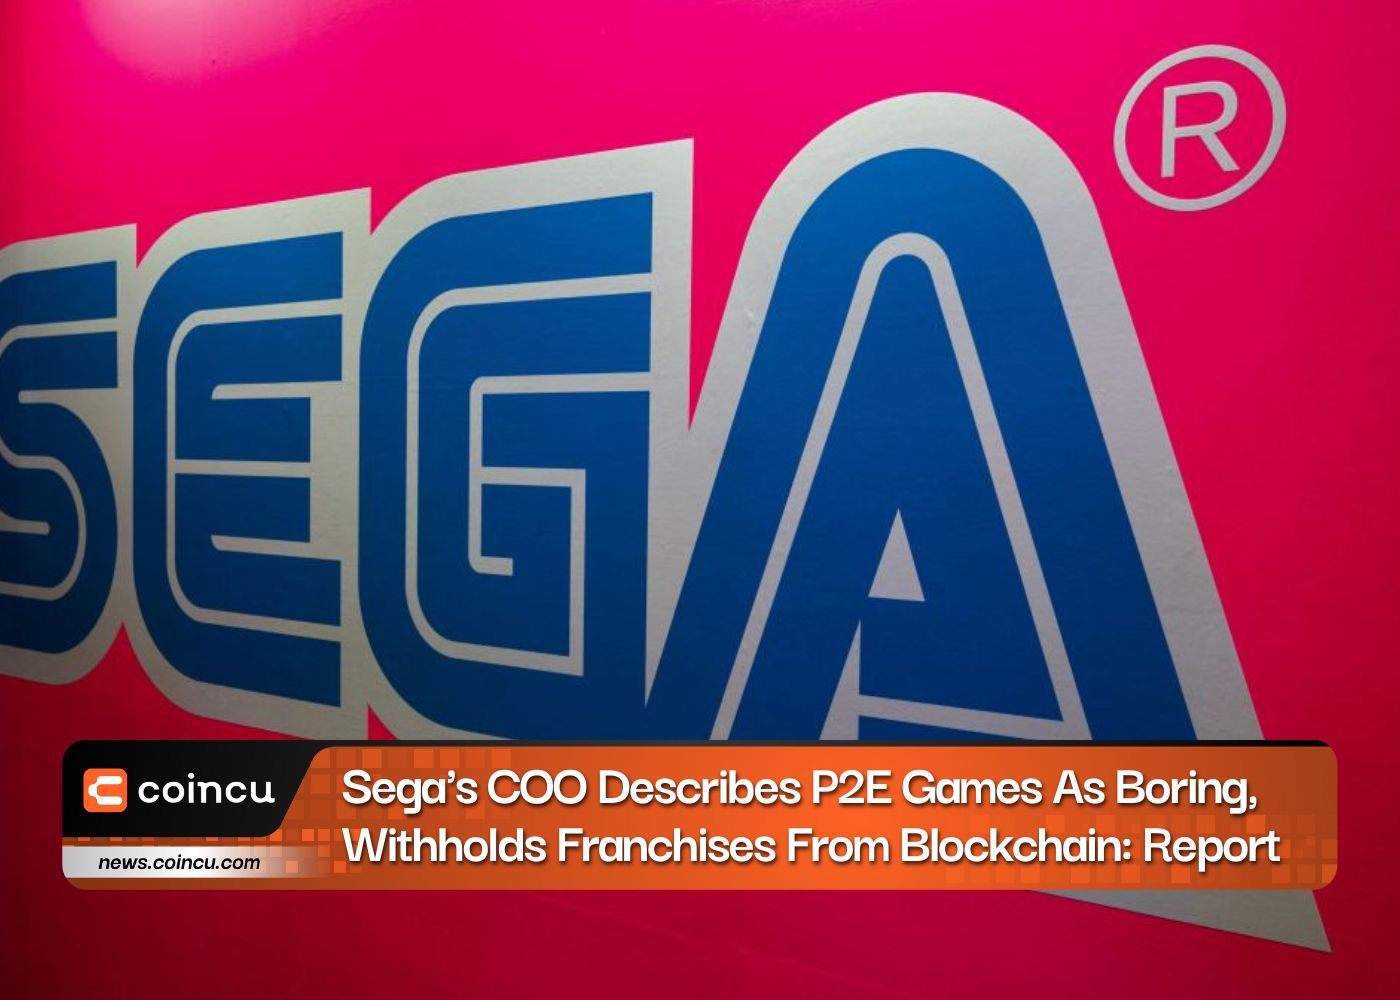 Sega's COO Describes P2E Games As Boring, Withholds Franchises From Blockchain: Report